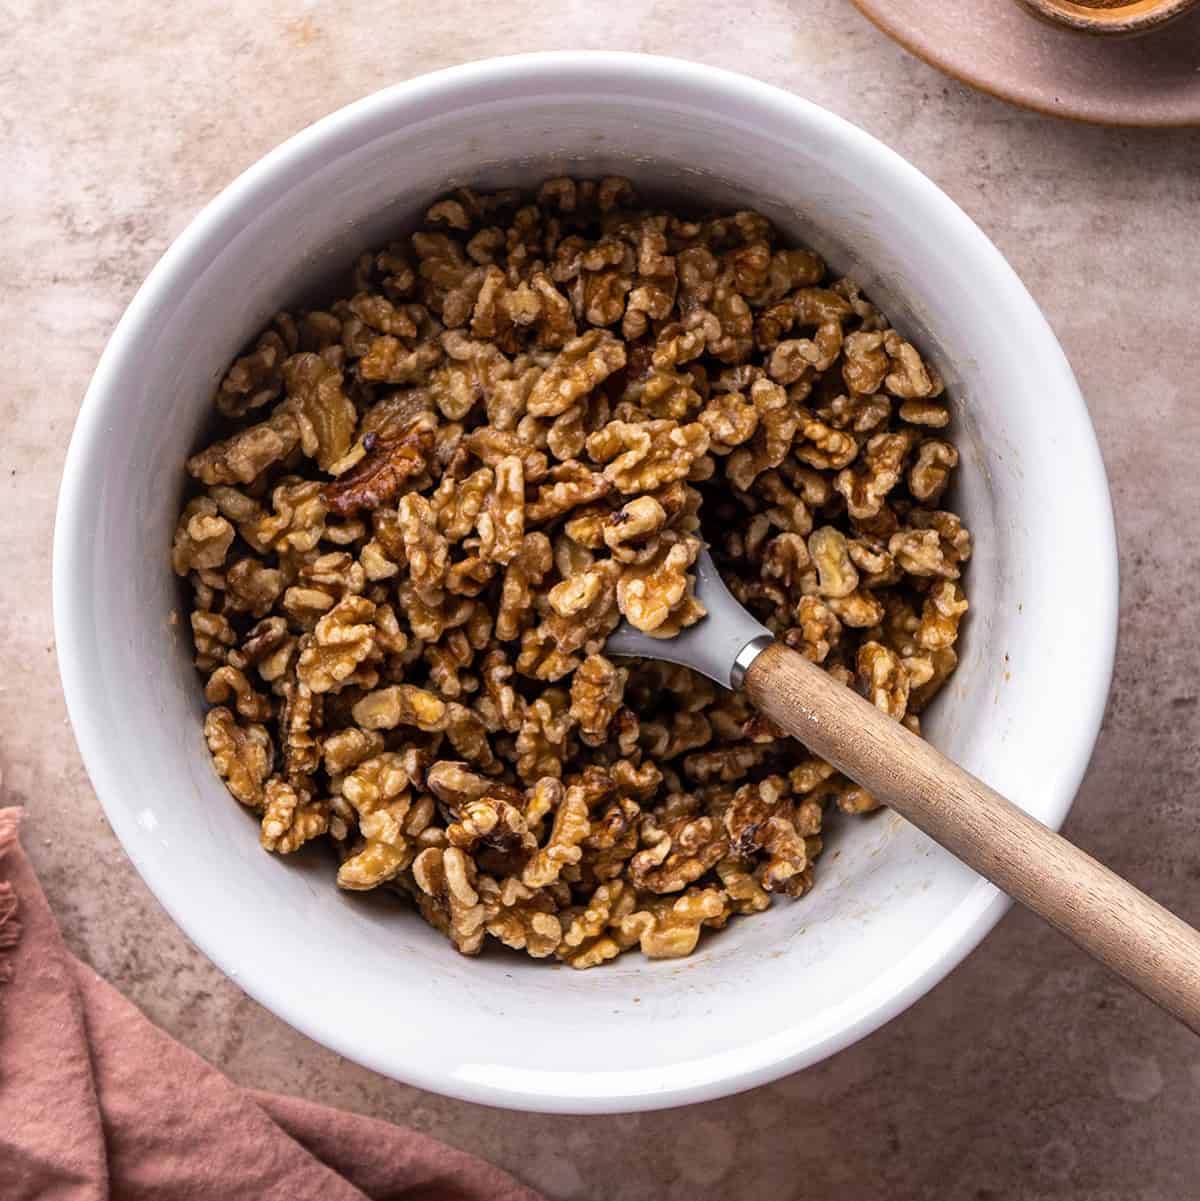 how to make candied walnuts - coating walnuts with egg white mixture